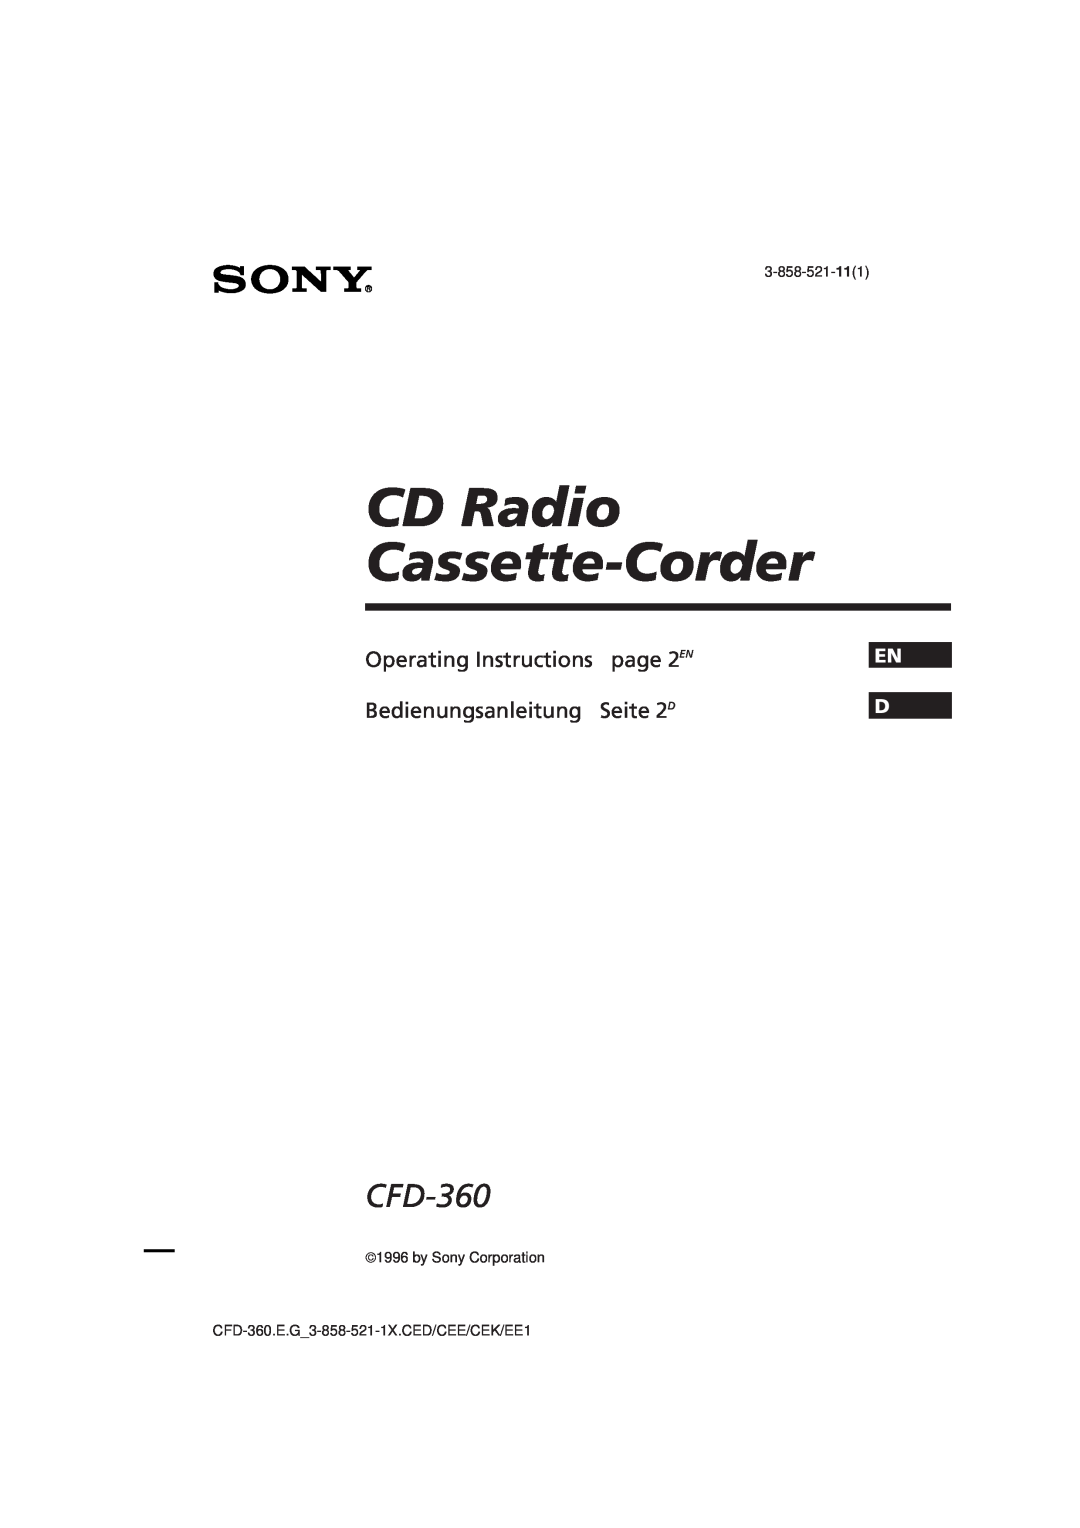 Sony CFD-360 operating instructions CD Radio Cassette-Corder, Operating Instructions, page 2EN, Bedienungsanleitung 